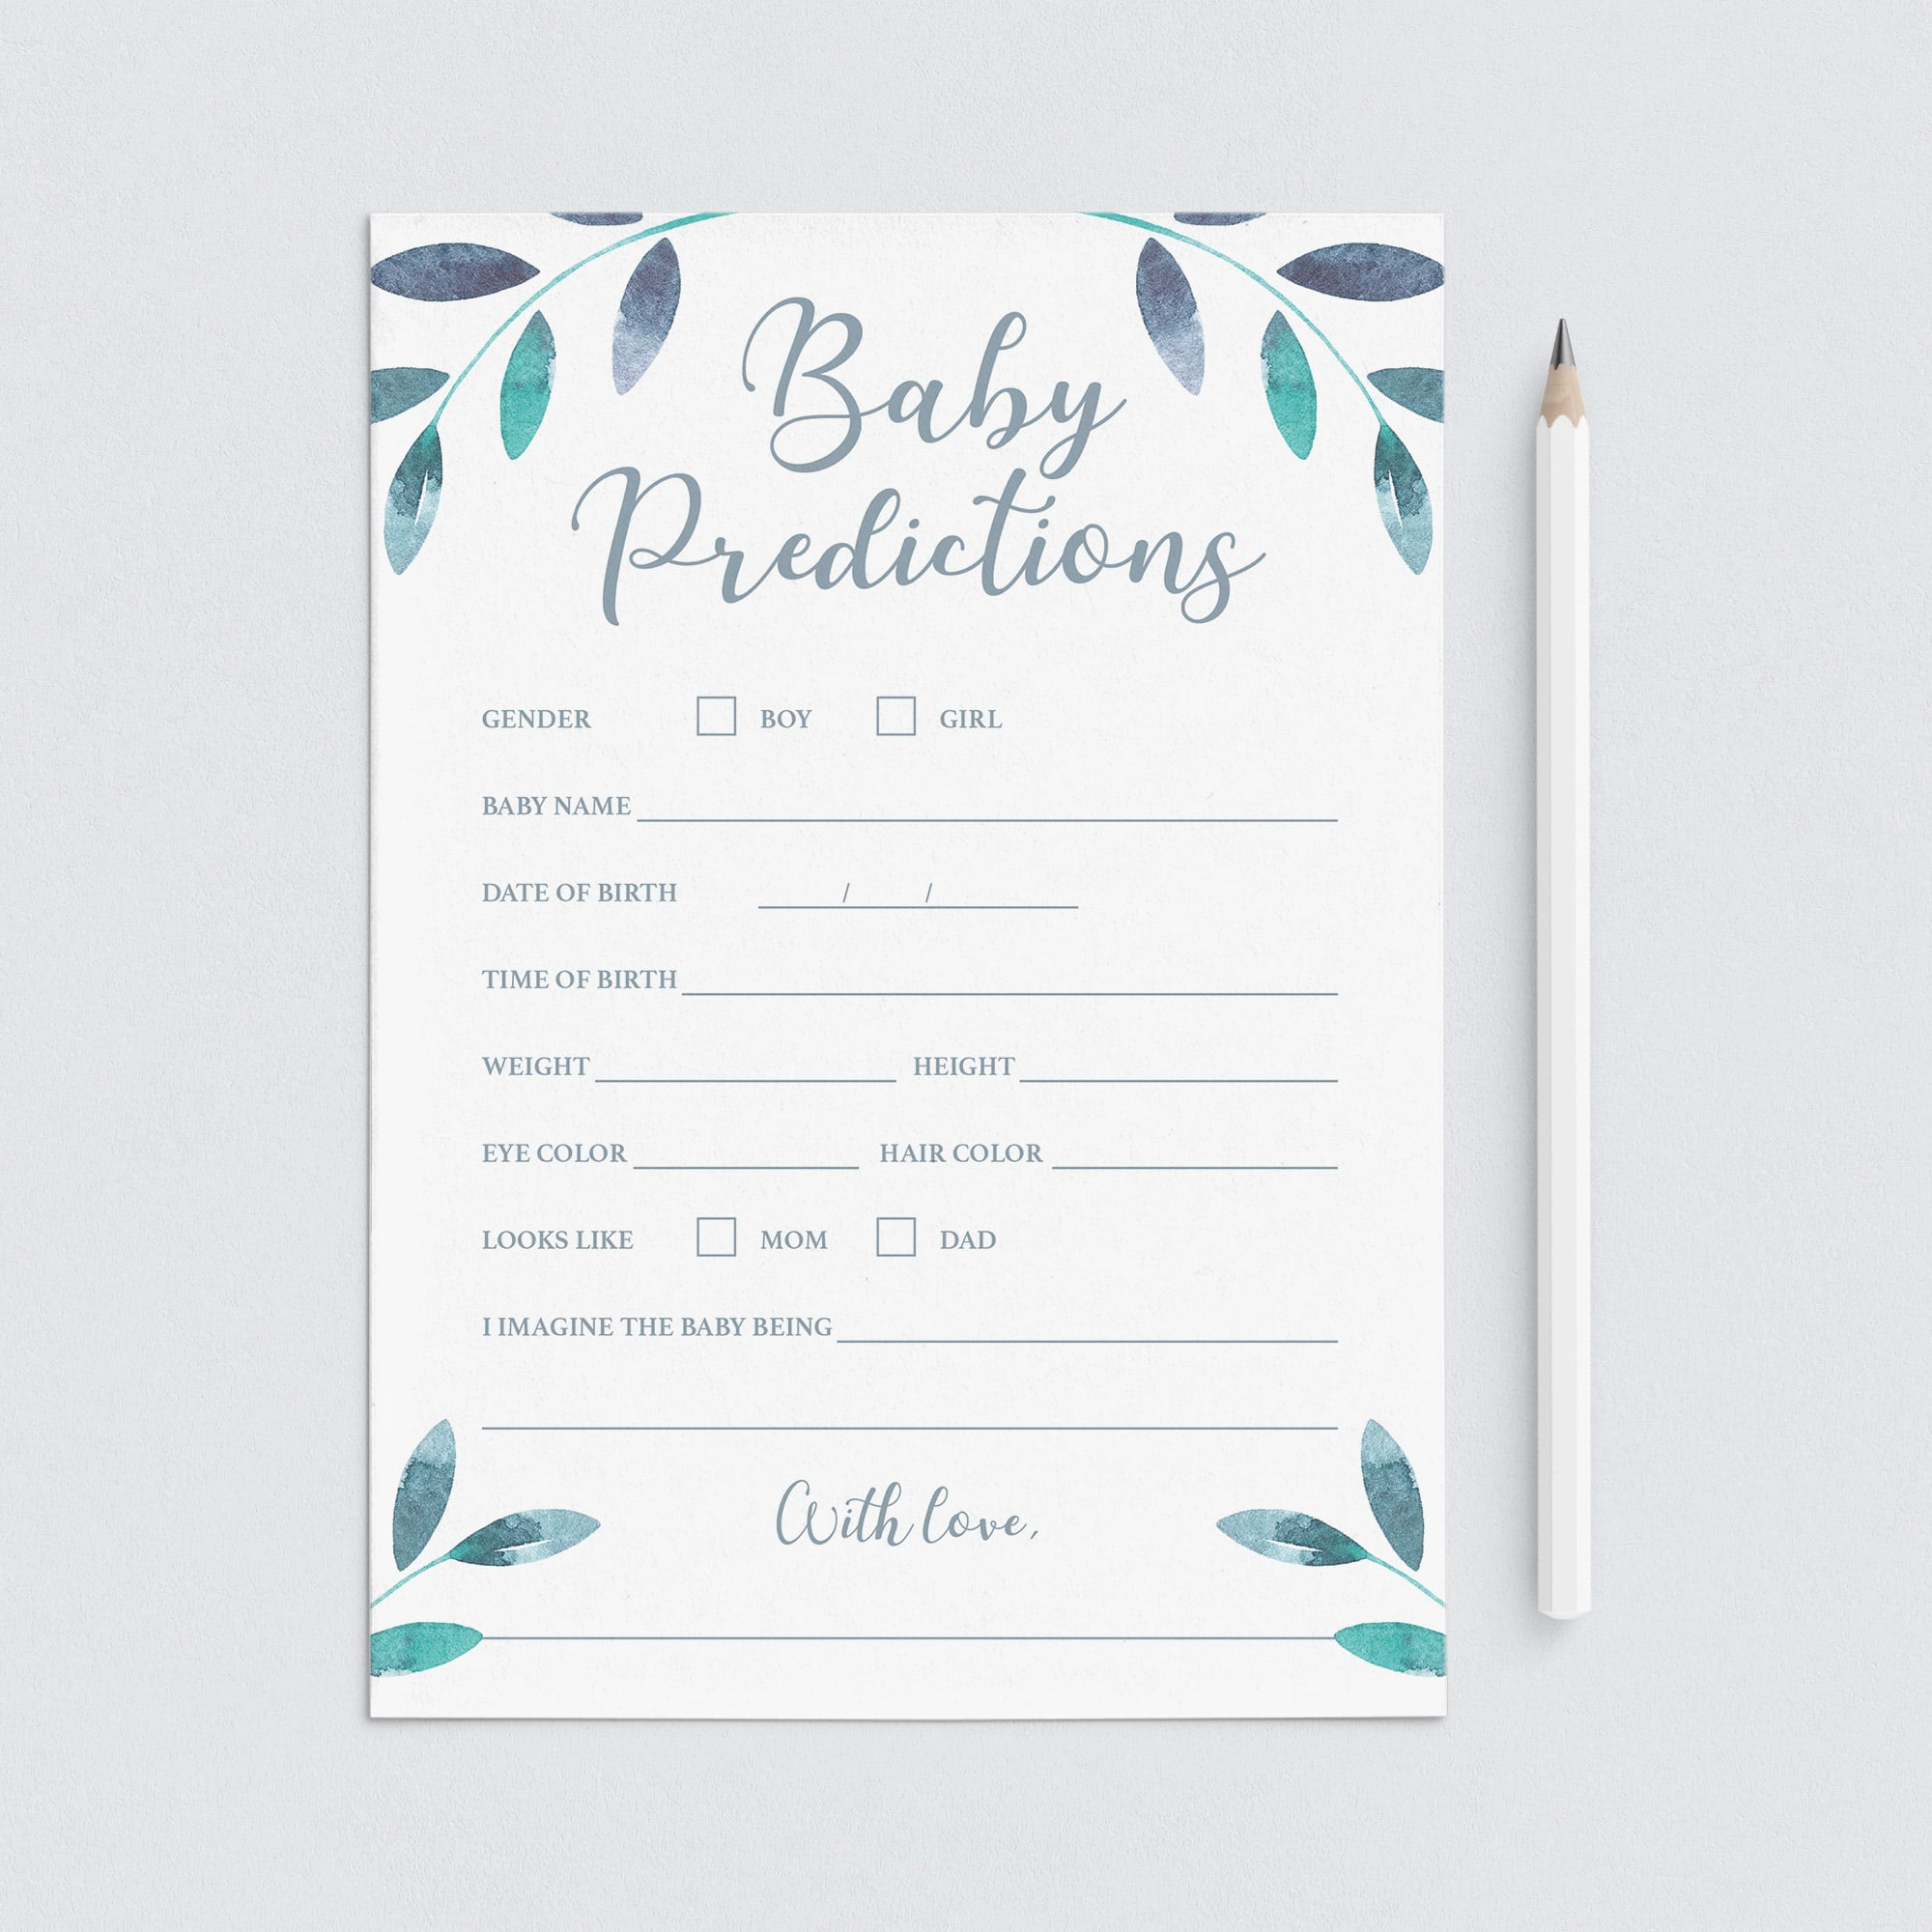 Winter baby predictions baby shower game printable by LittleSizzle